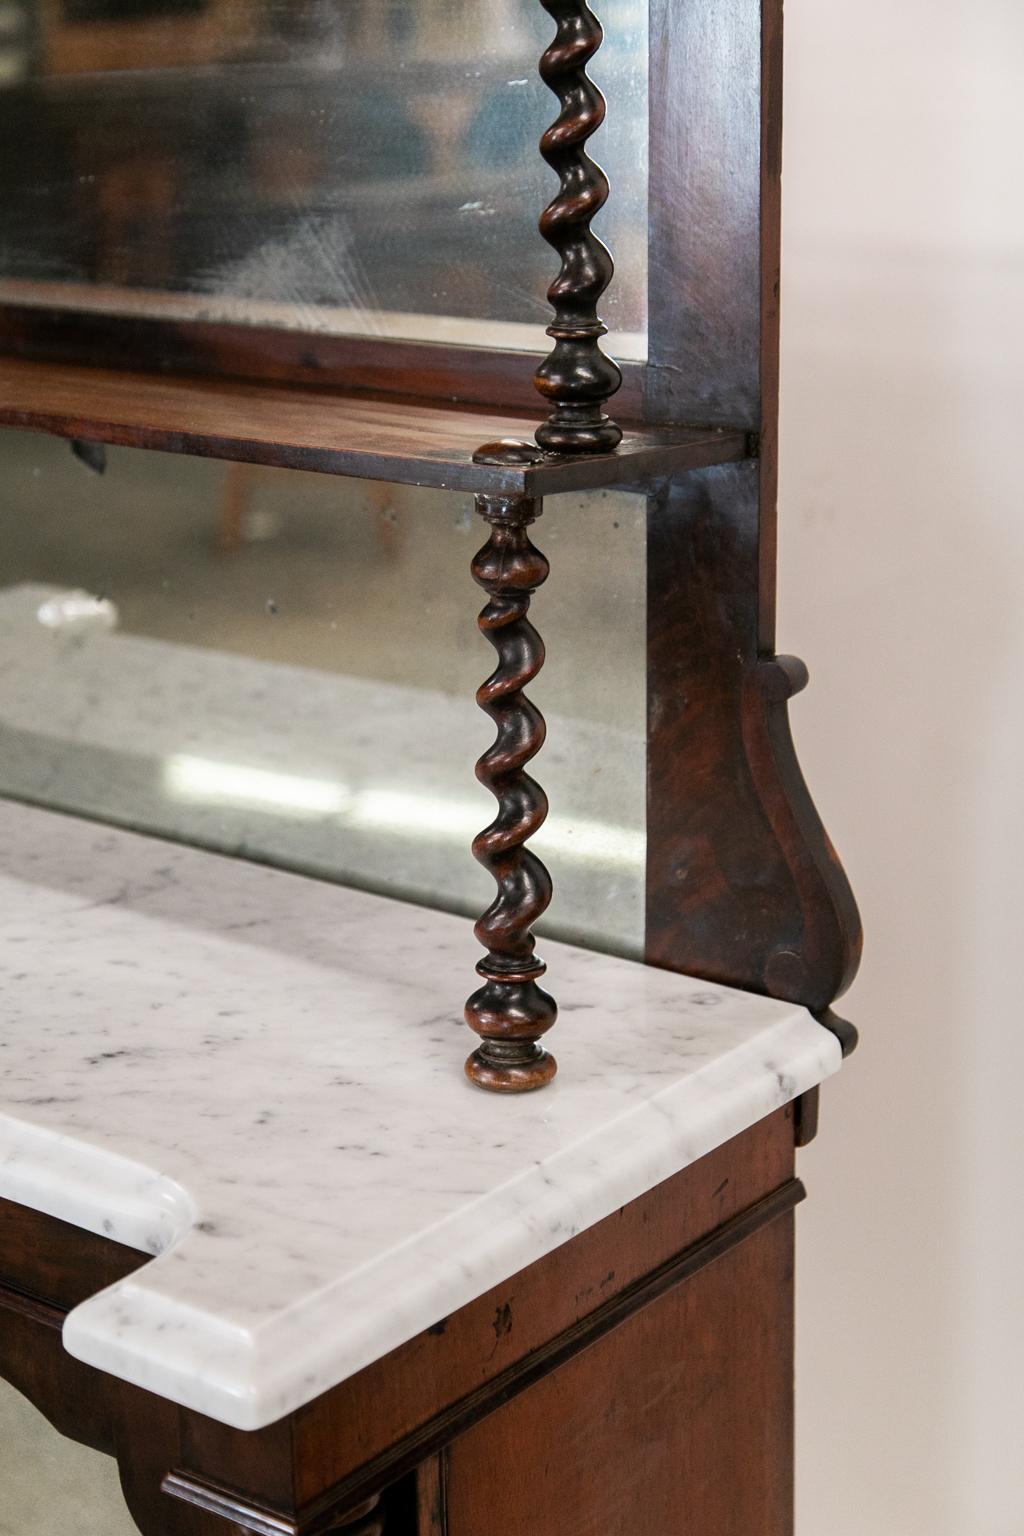 The top of this mahogany barley twist chiffonier has a reticulated crest and is supported by four barley twist columns. The shelves and doors have the original mirrored glass which are all distressed due to age. The lower door has the original brass